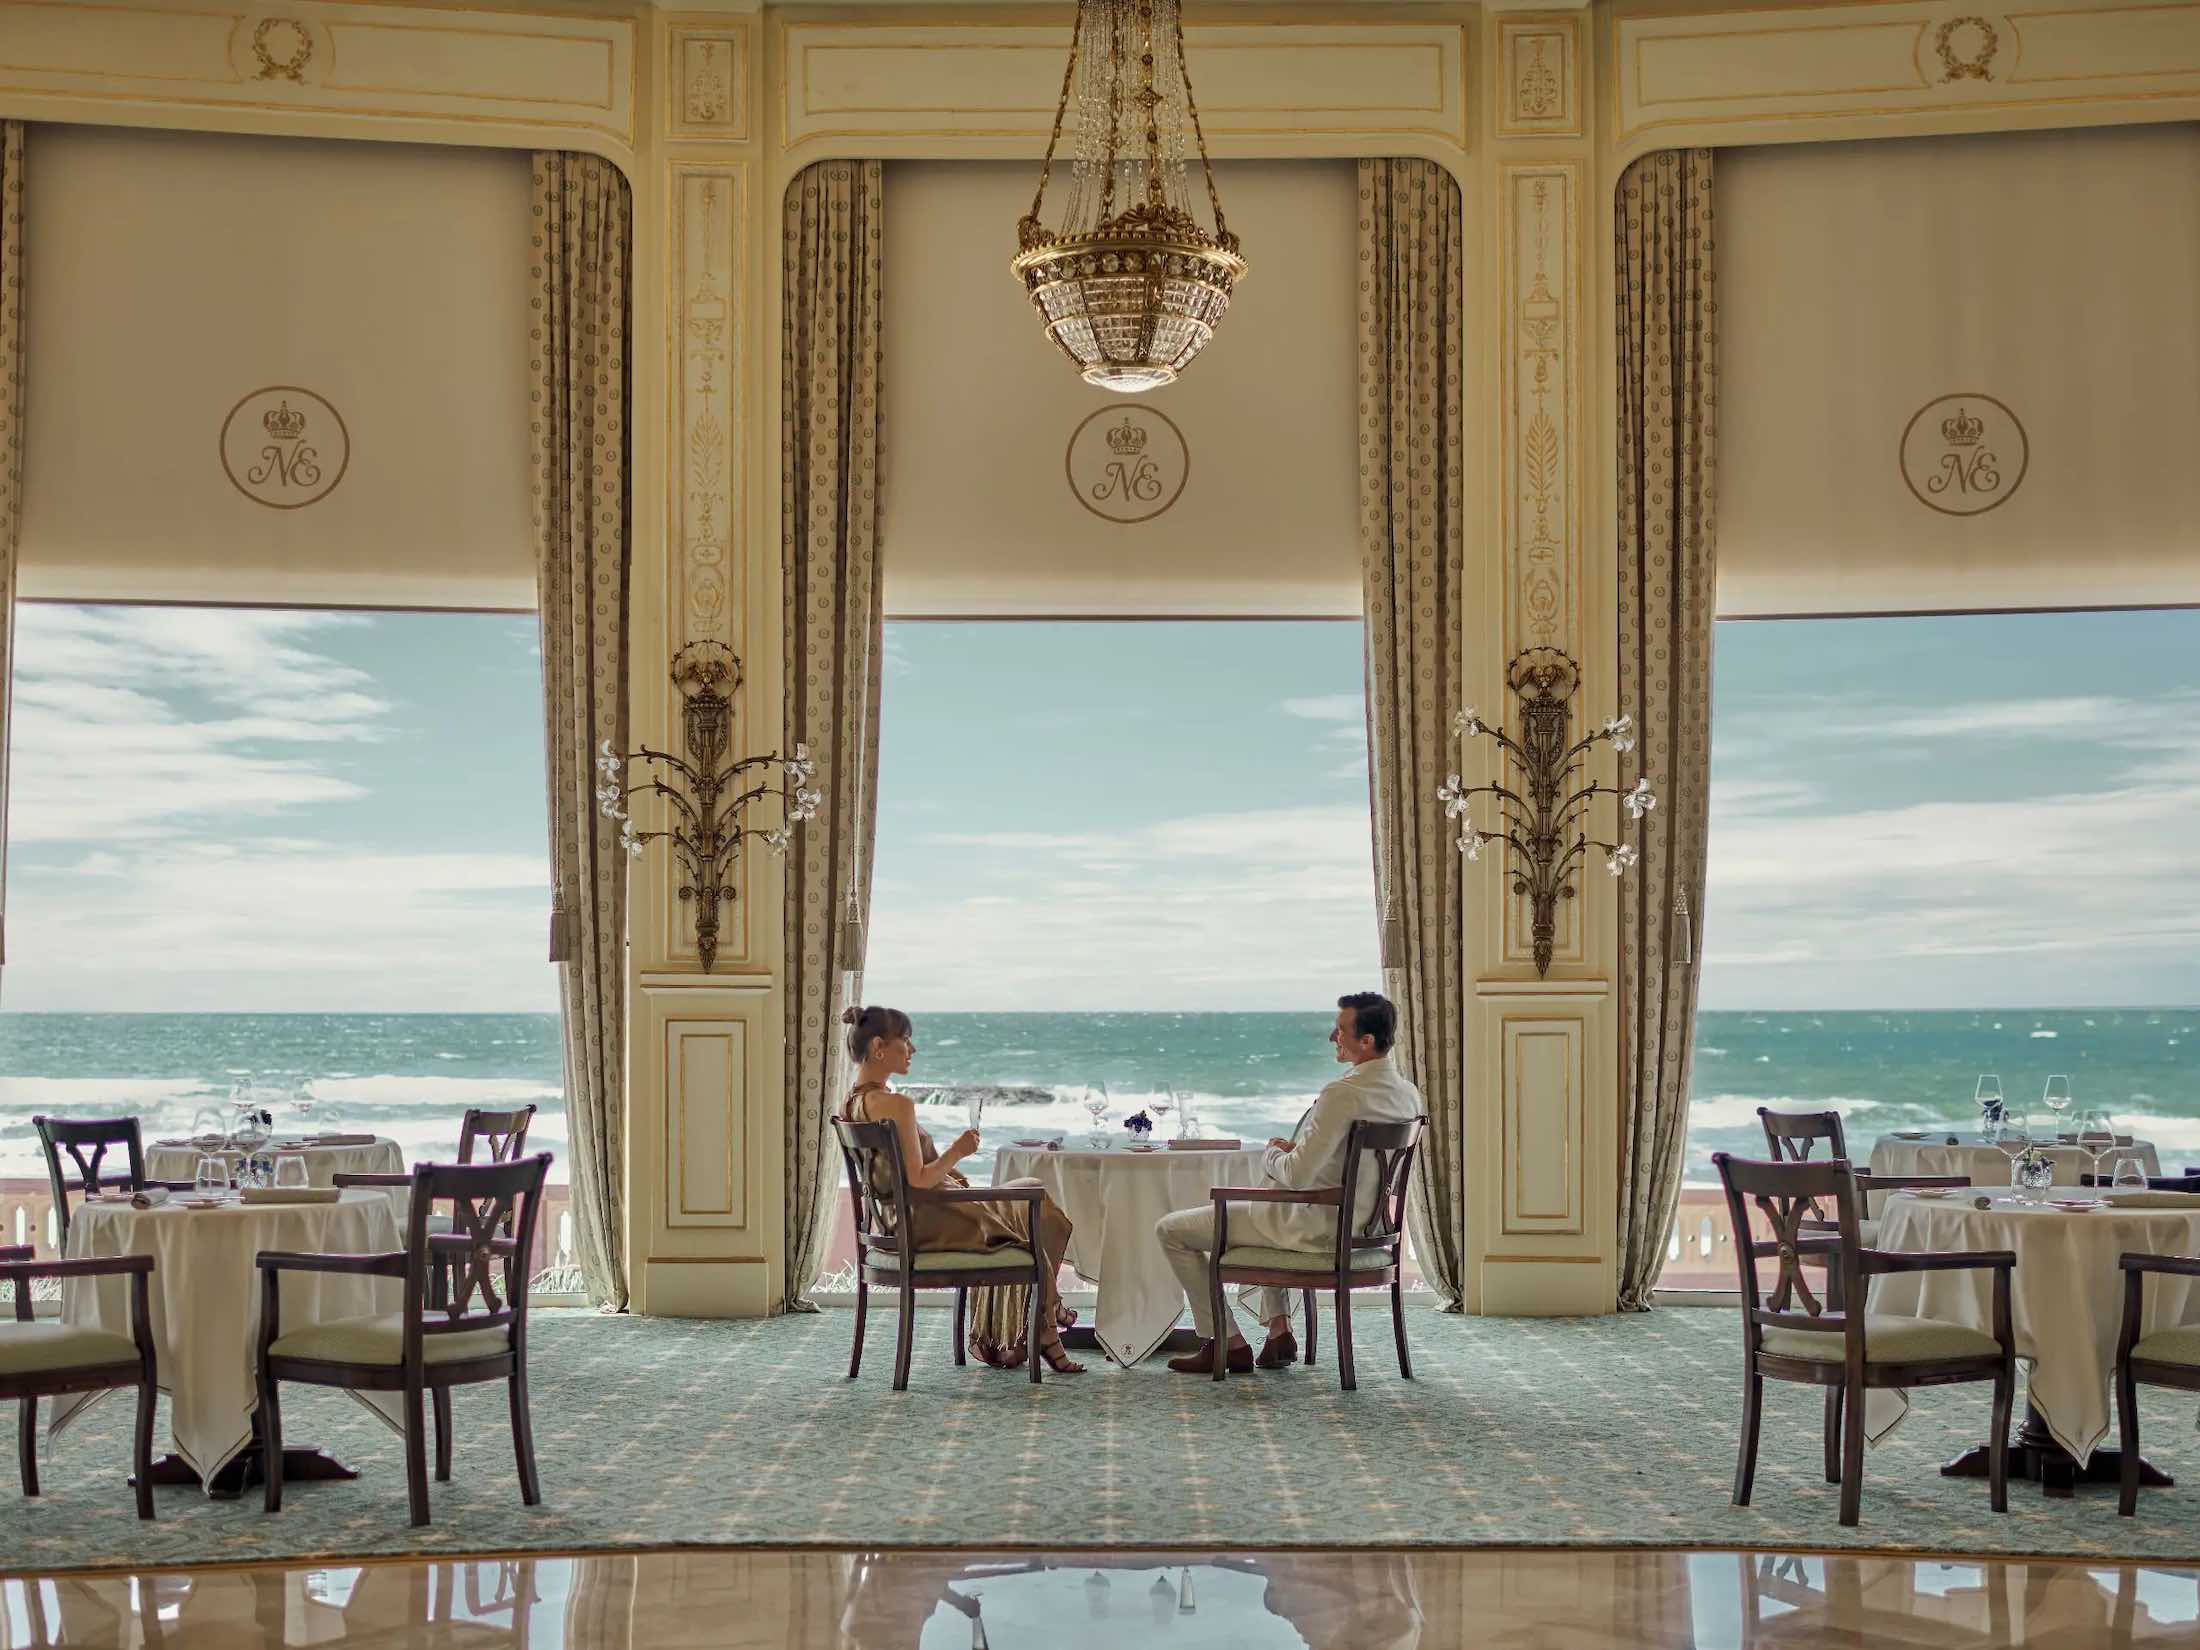 a man and woman sitting at tables in a room with ocean view